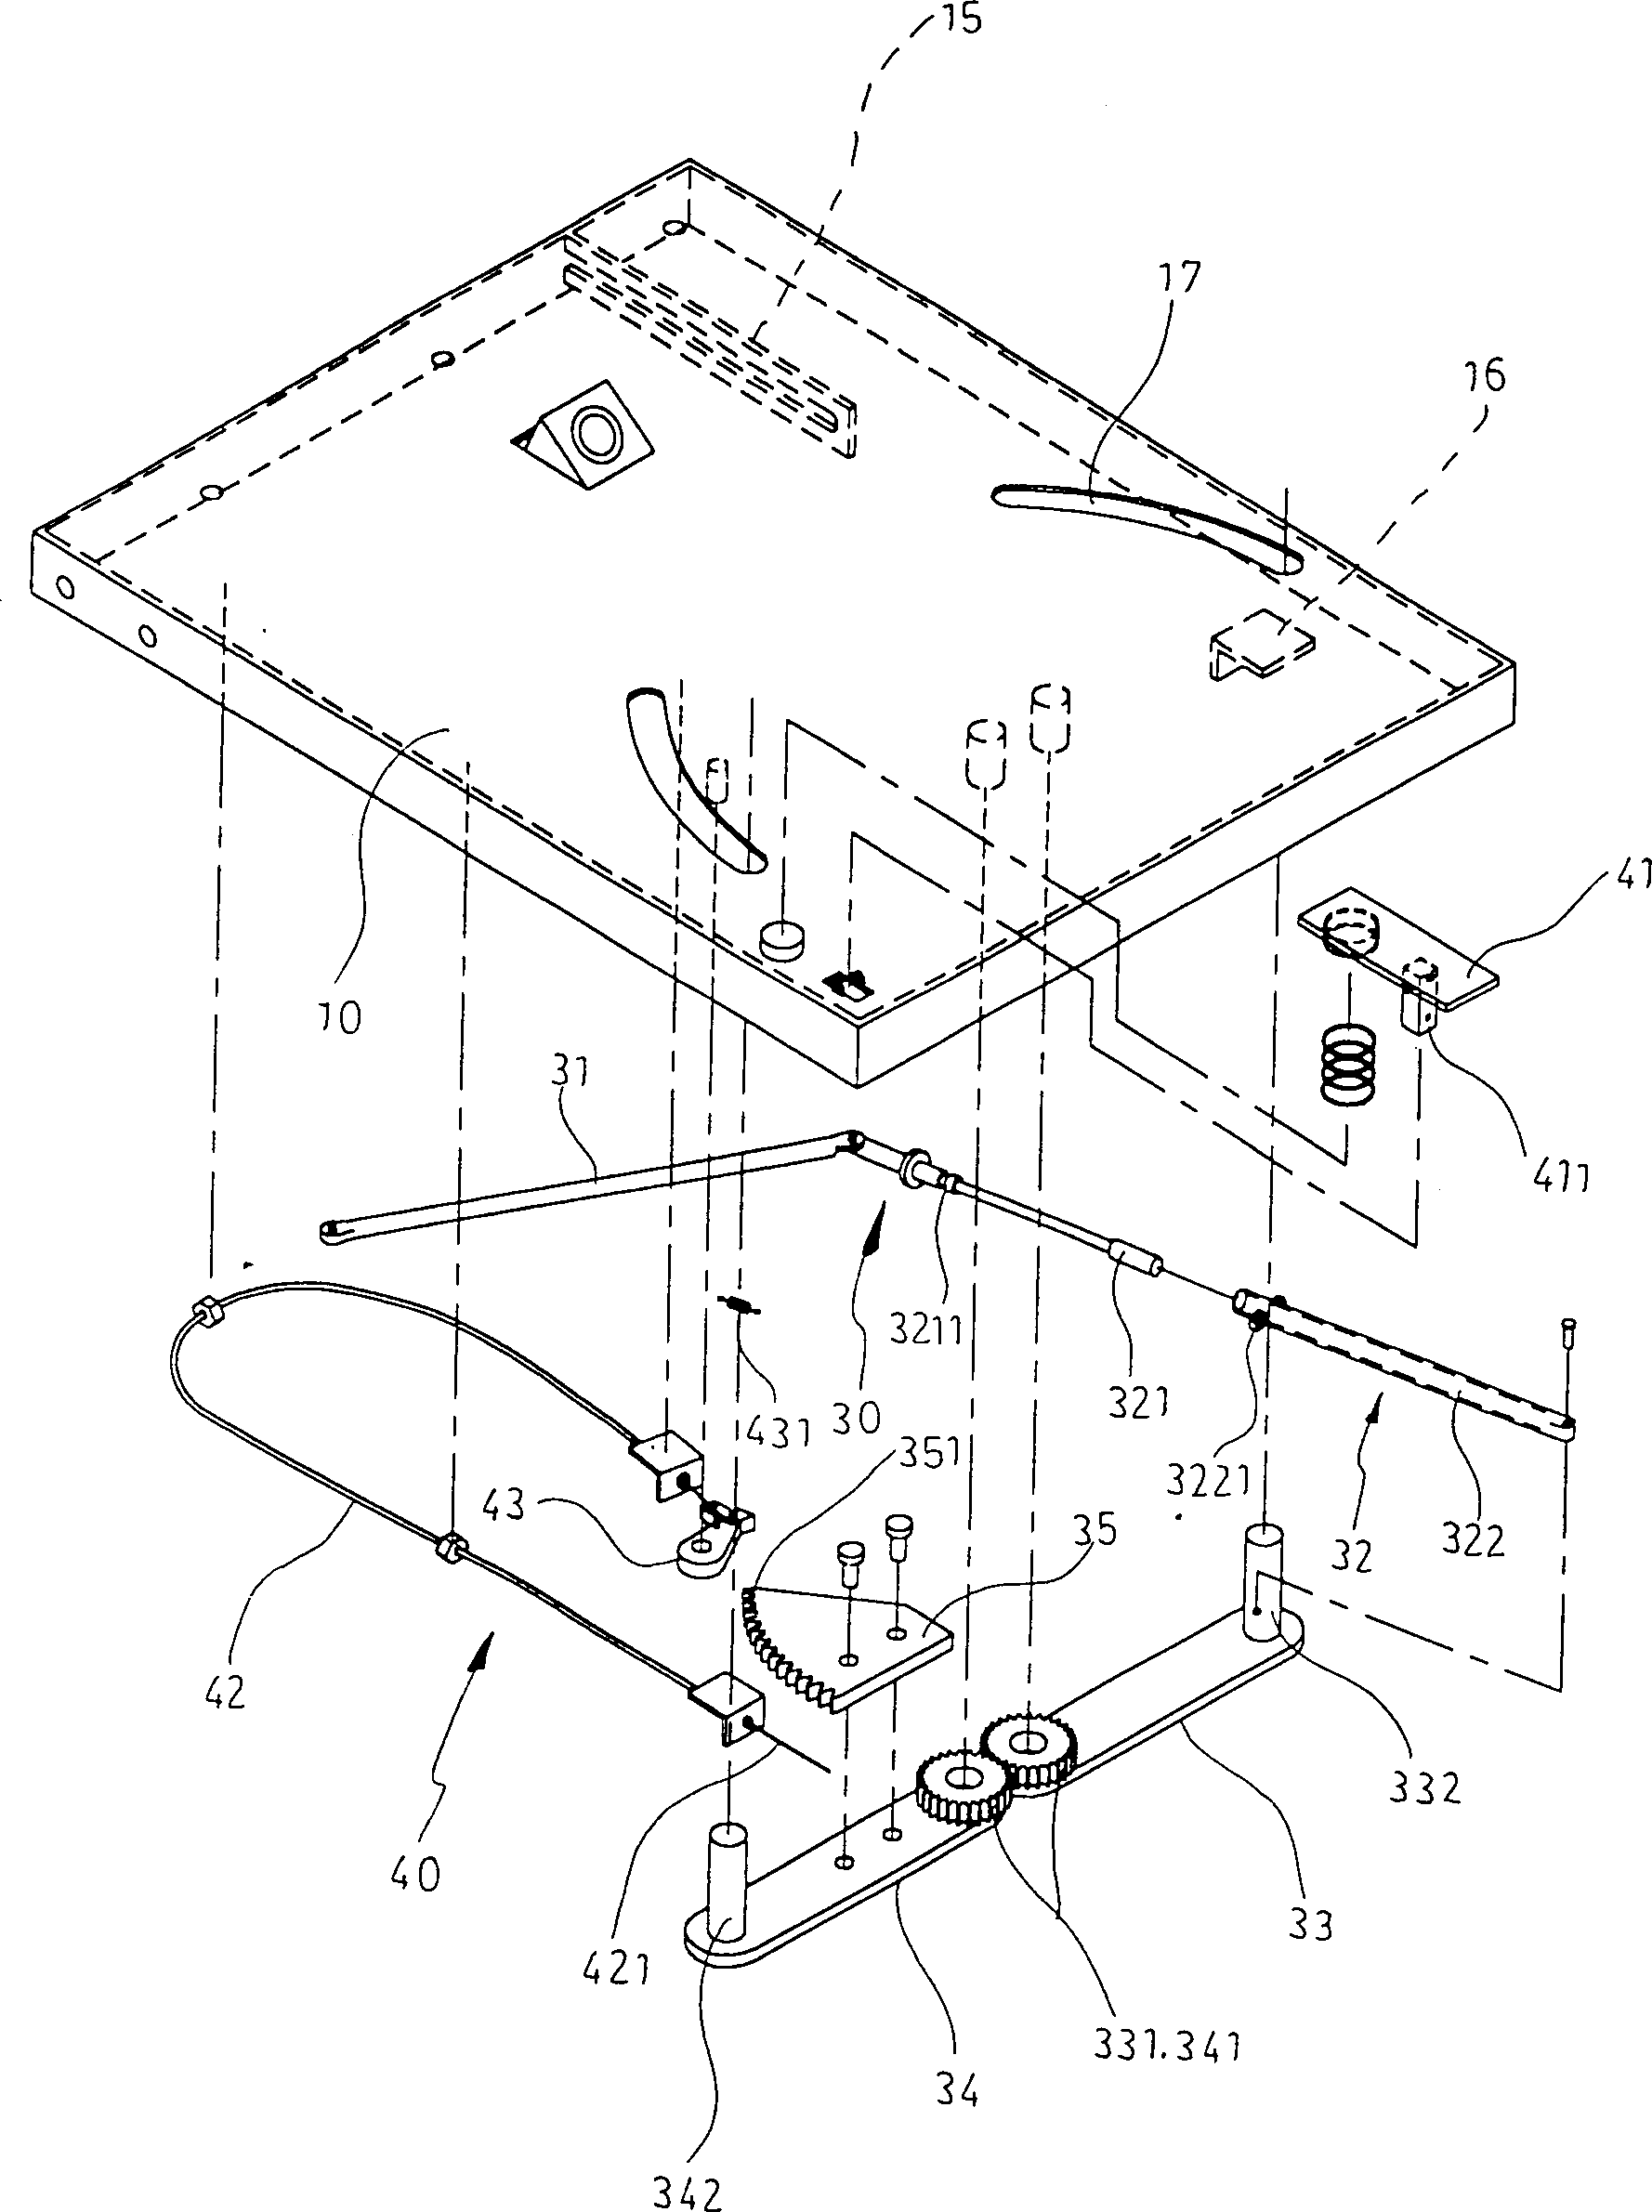 Automatic locomotive parking, positioning and holding device